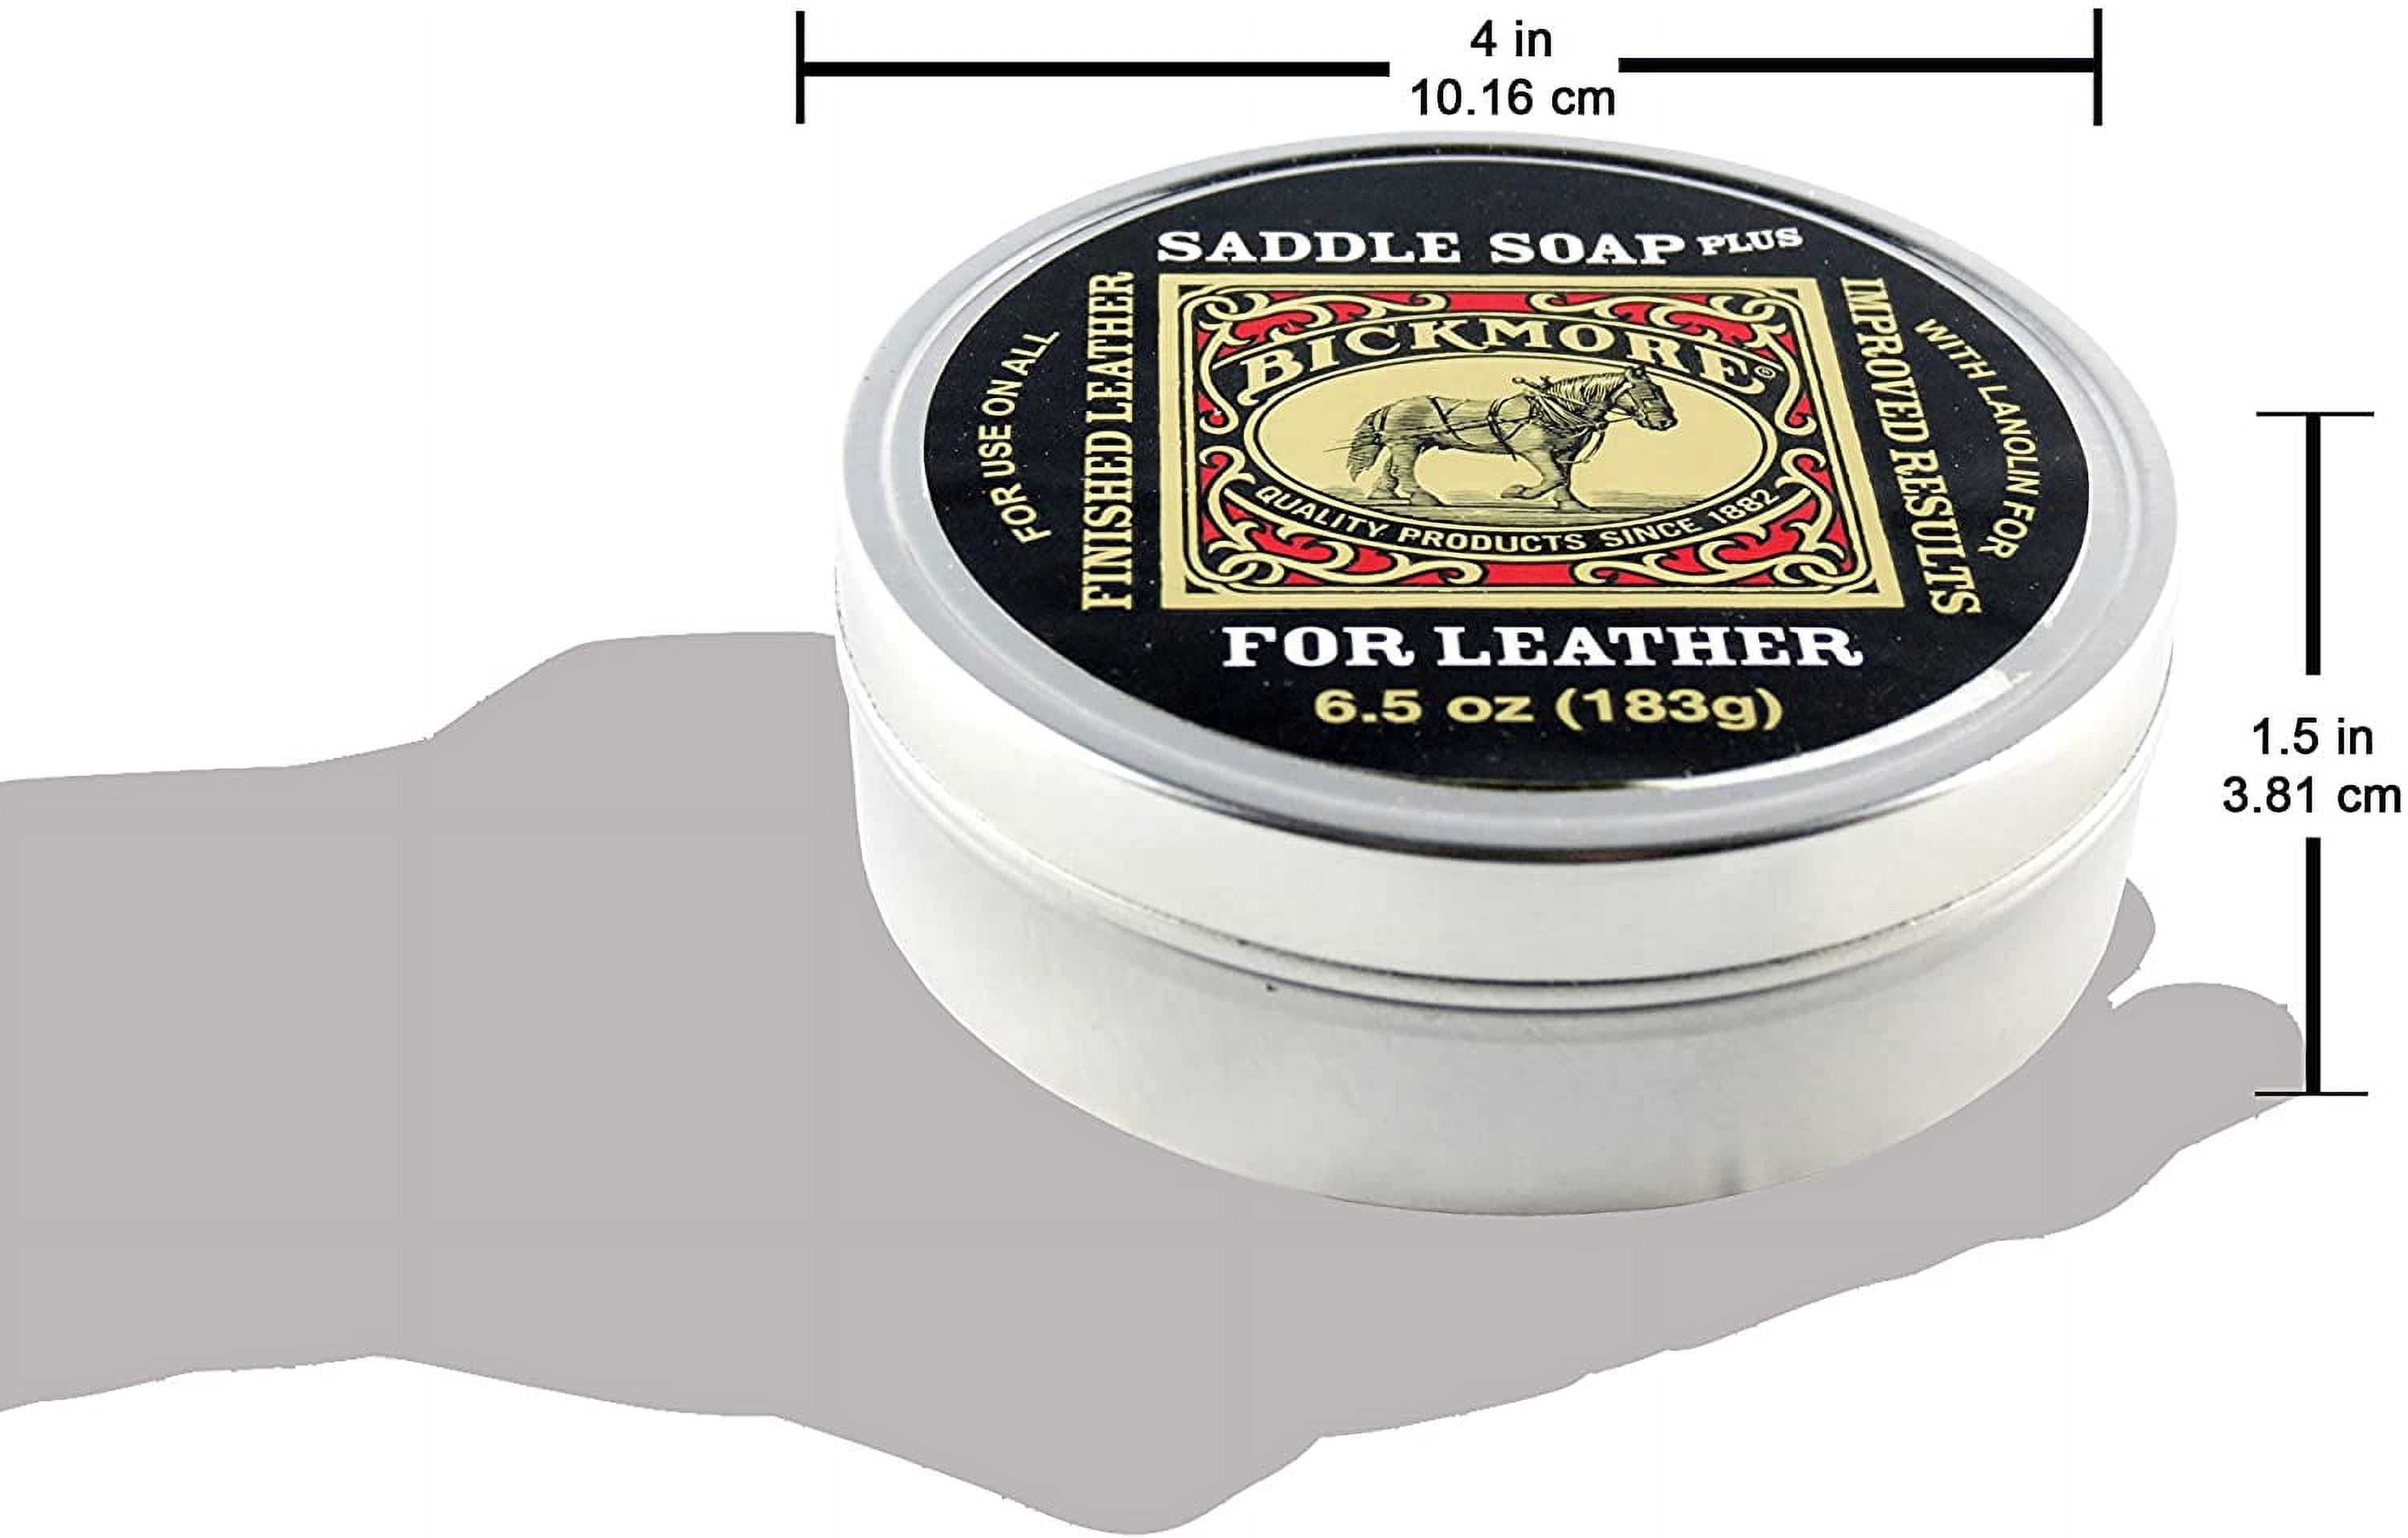 Bickmore Saddle Soap Plus by American Hat Makers